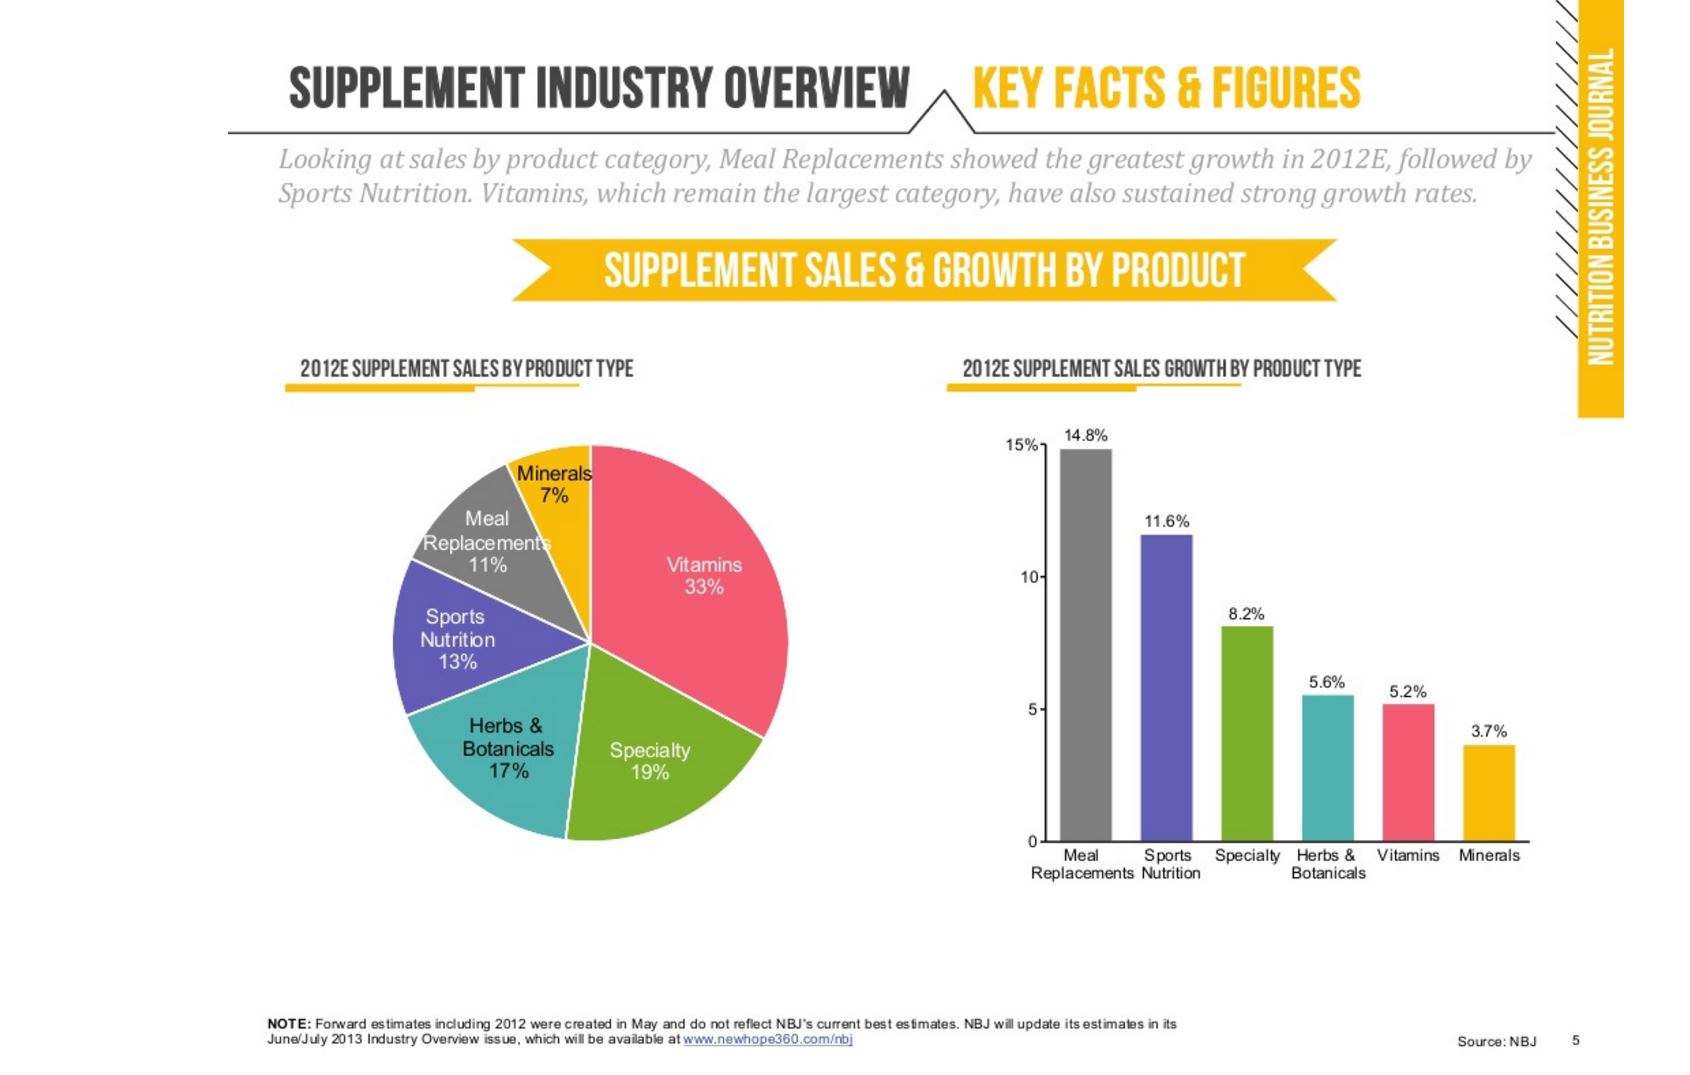 Which supplements are sold the most